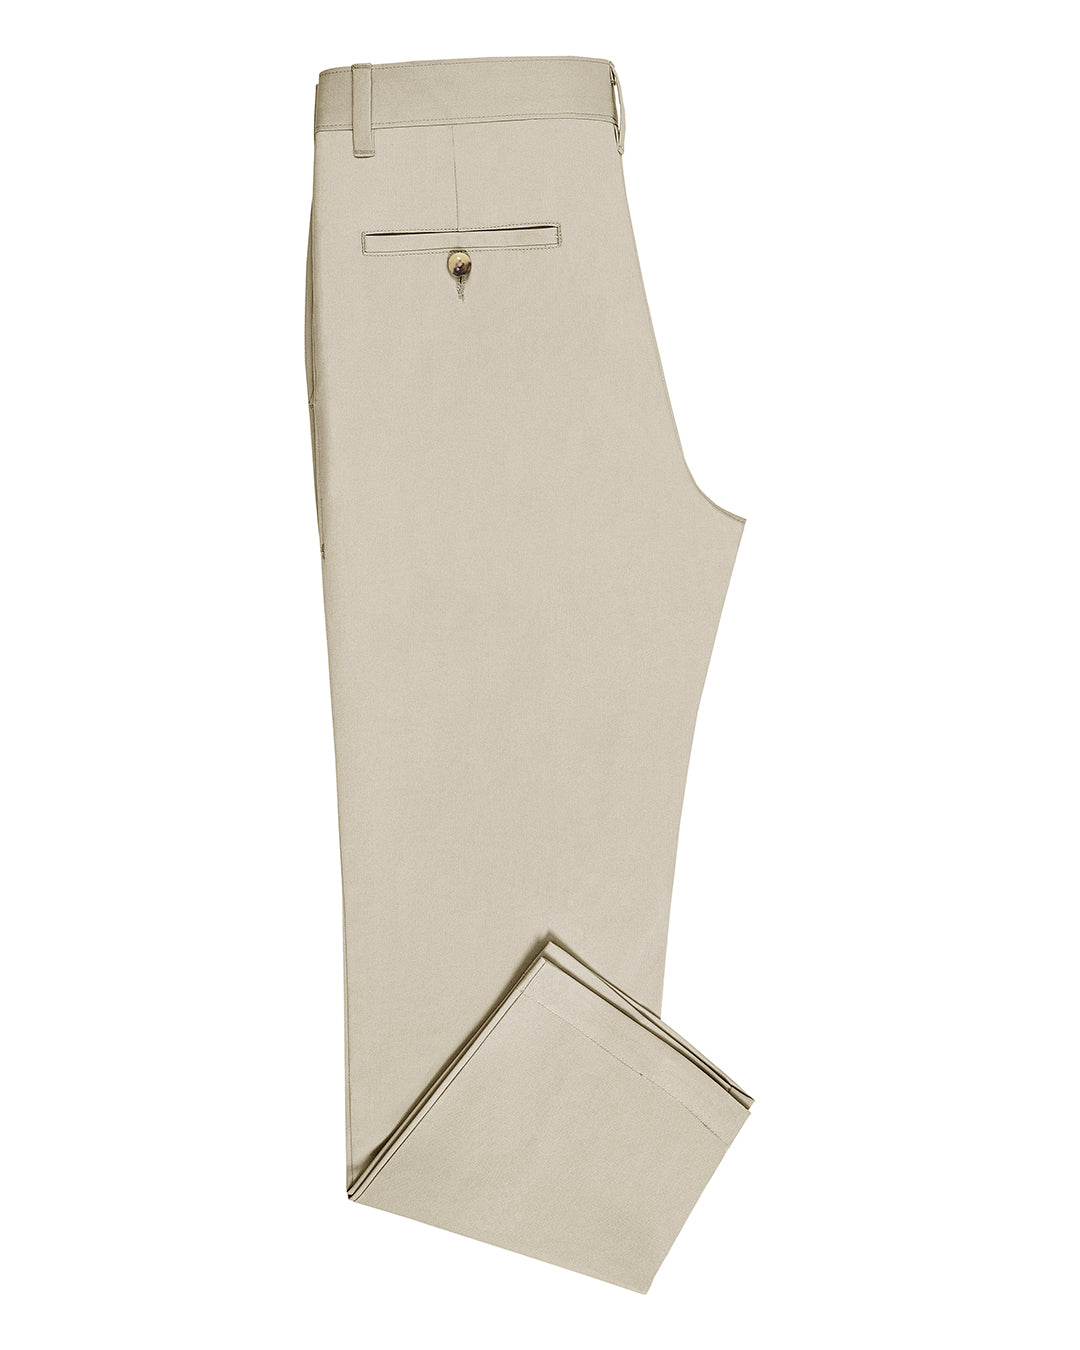 Side view of custom Genoa Chino pants for men by Luxire in light beige